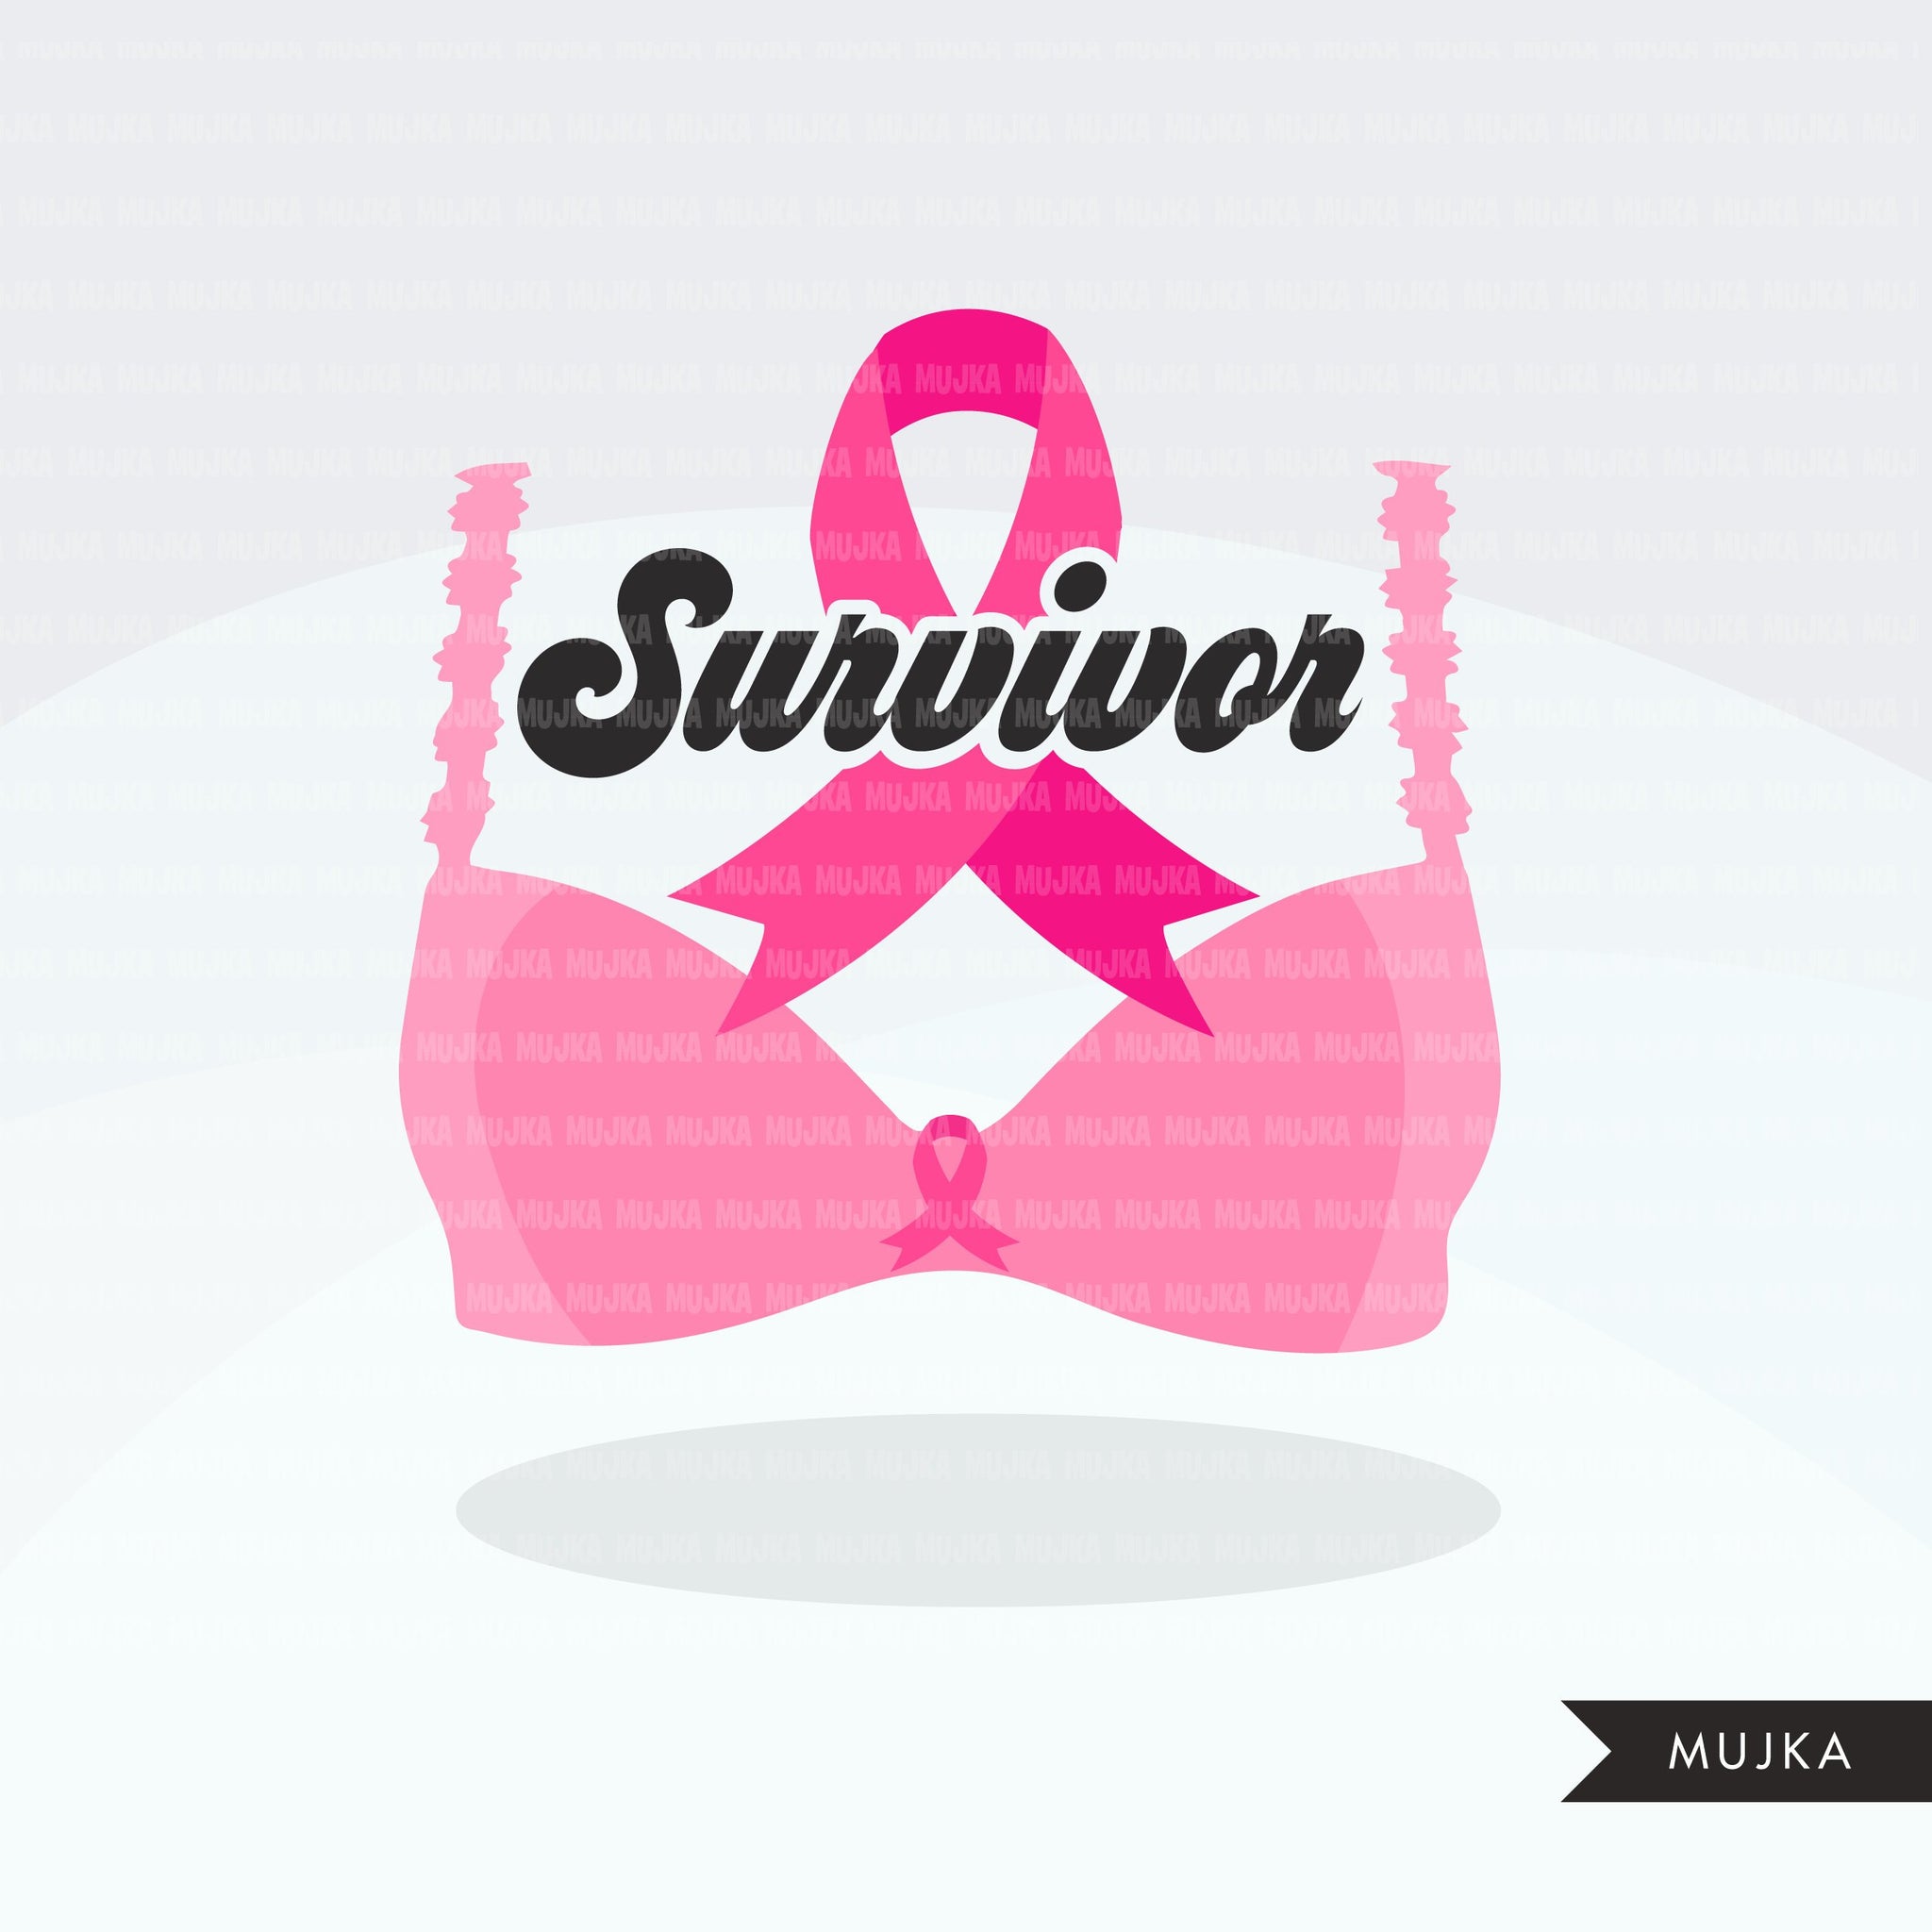 fight cancer logos